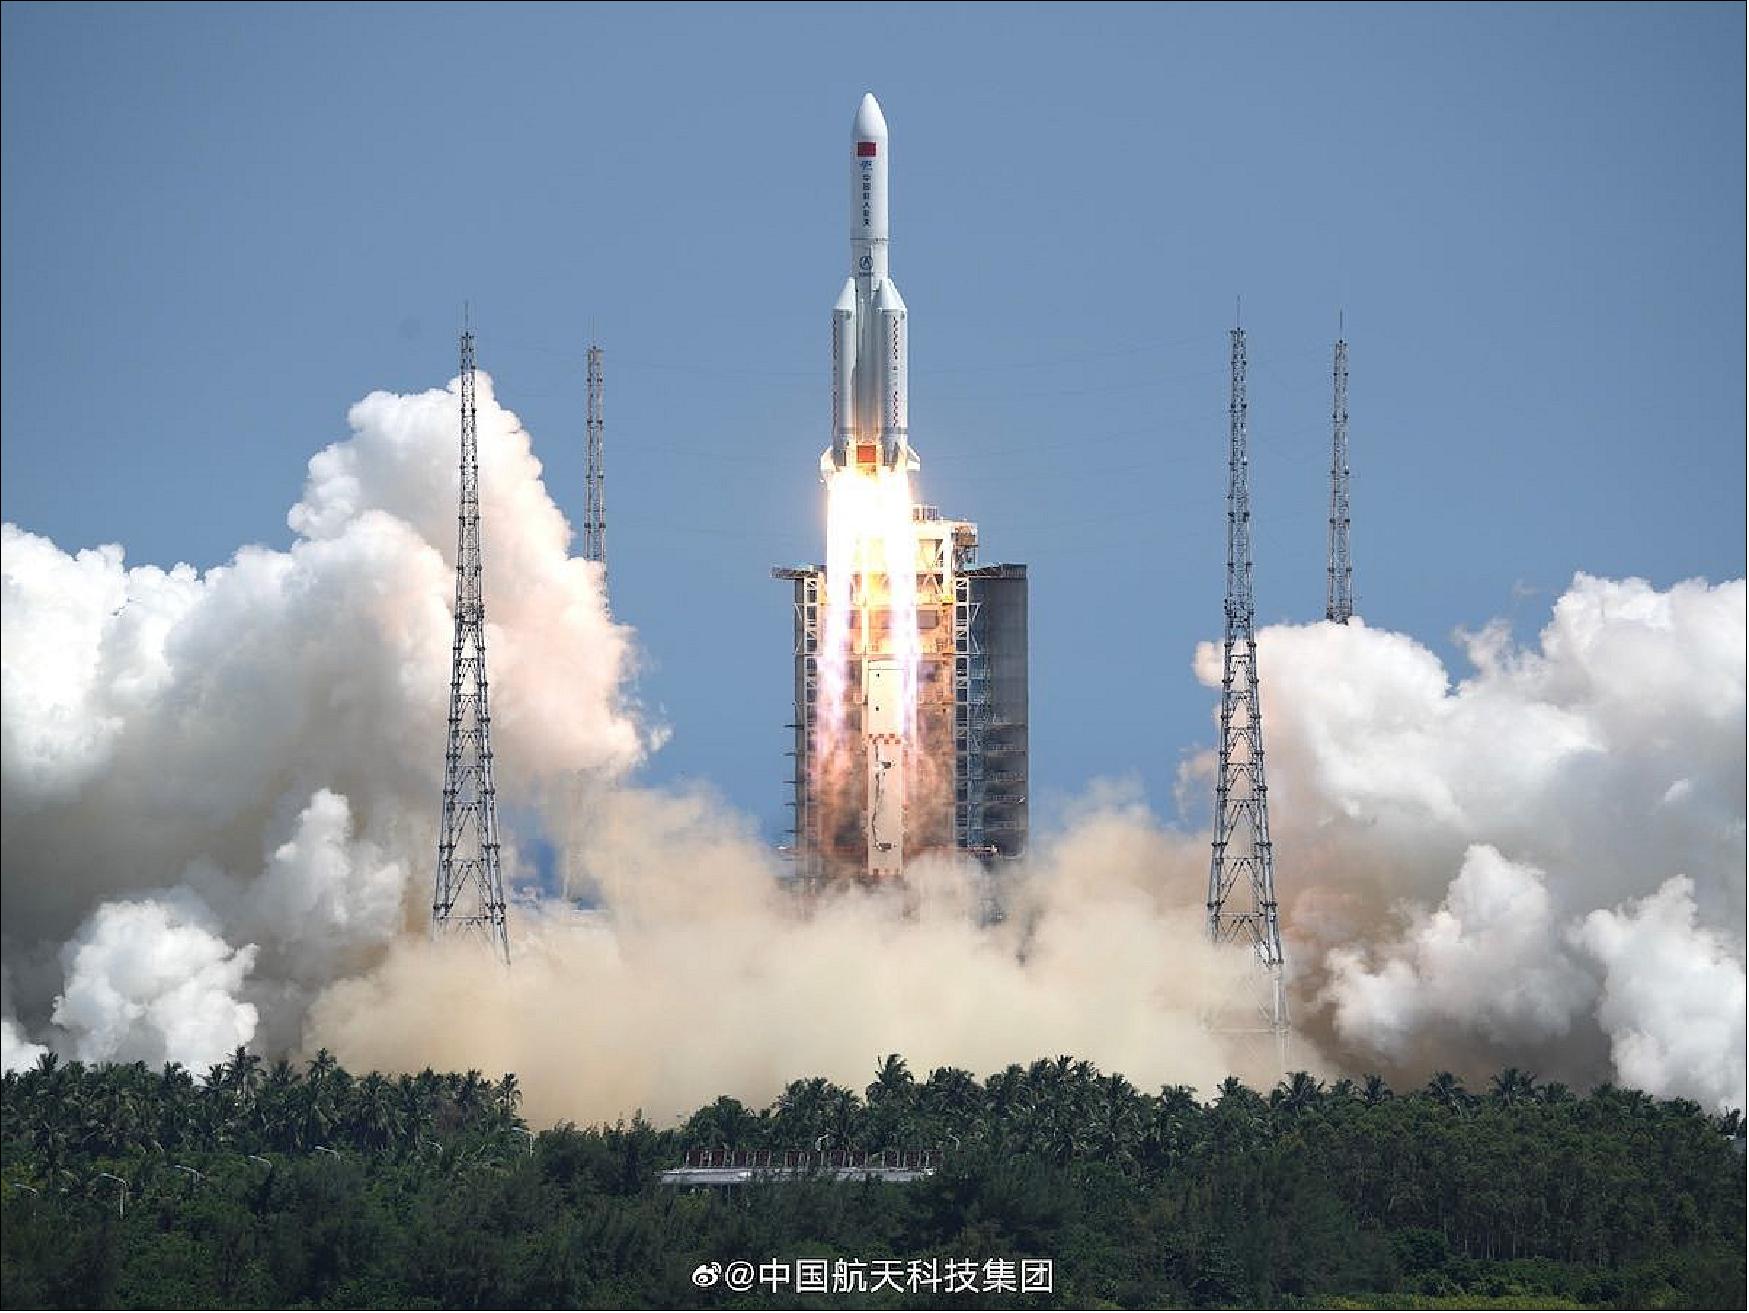 Figure 11: A Long March 5B rocket lifts off with the Wentian module bound for China’s Tiangong space station (image credit: CASC)